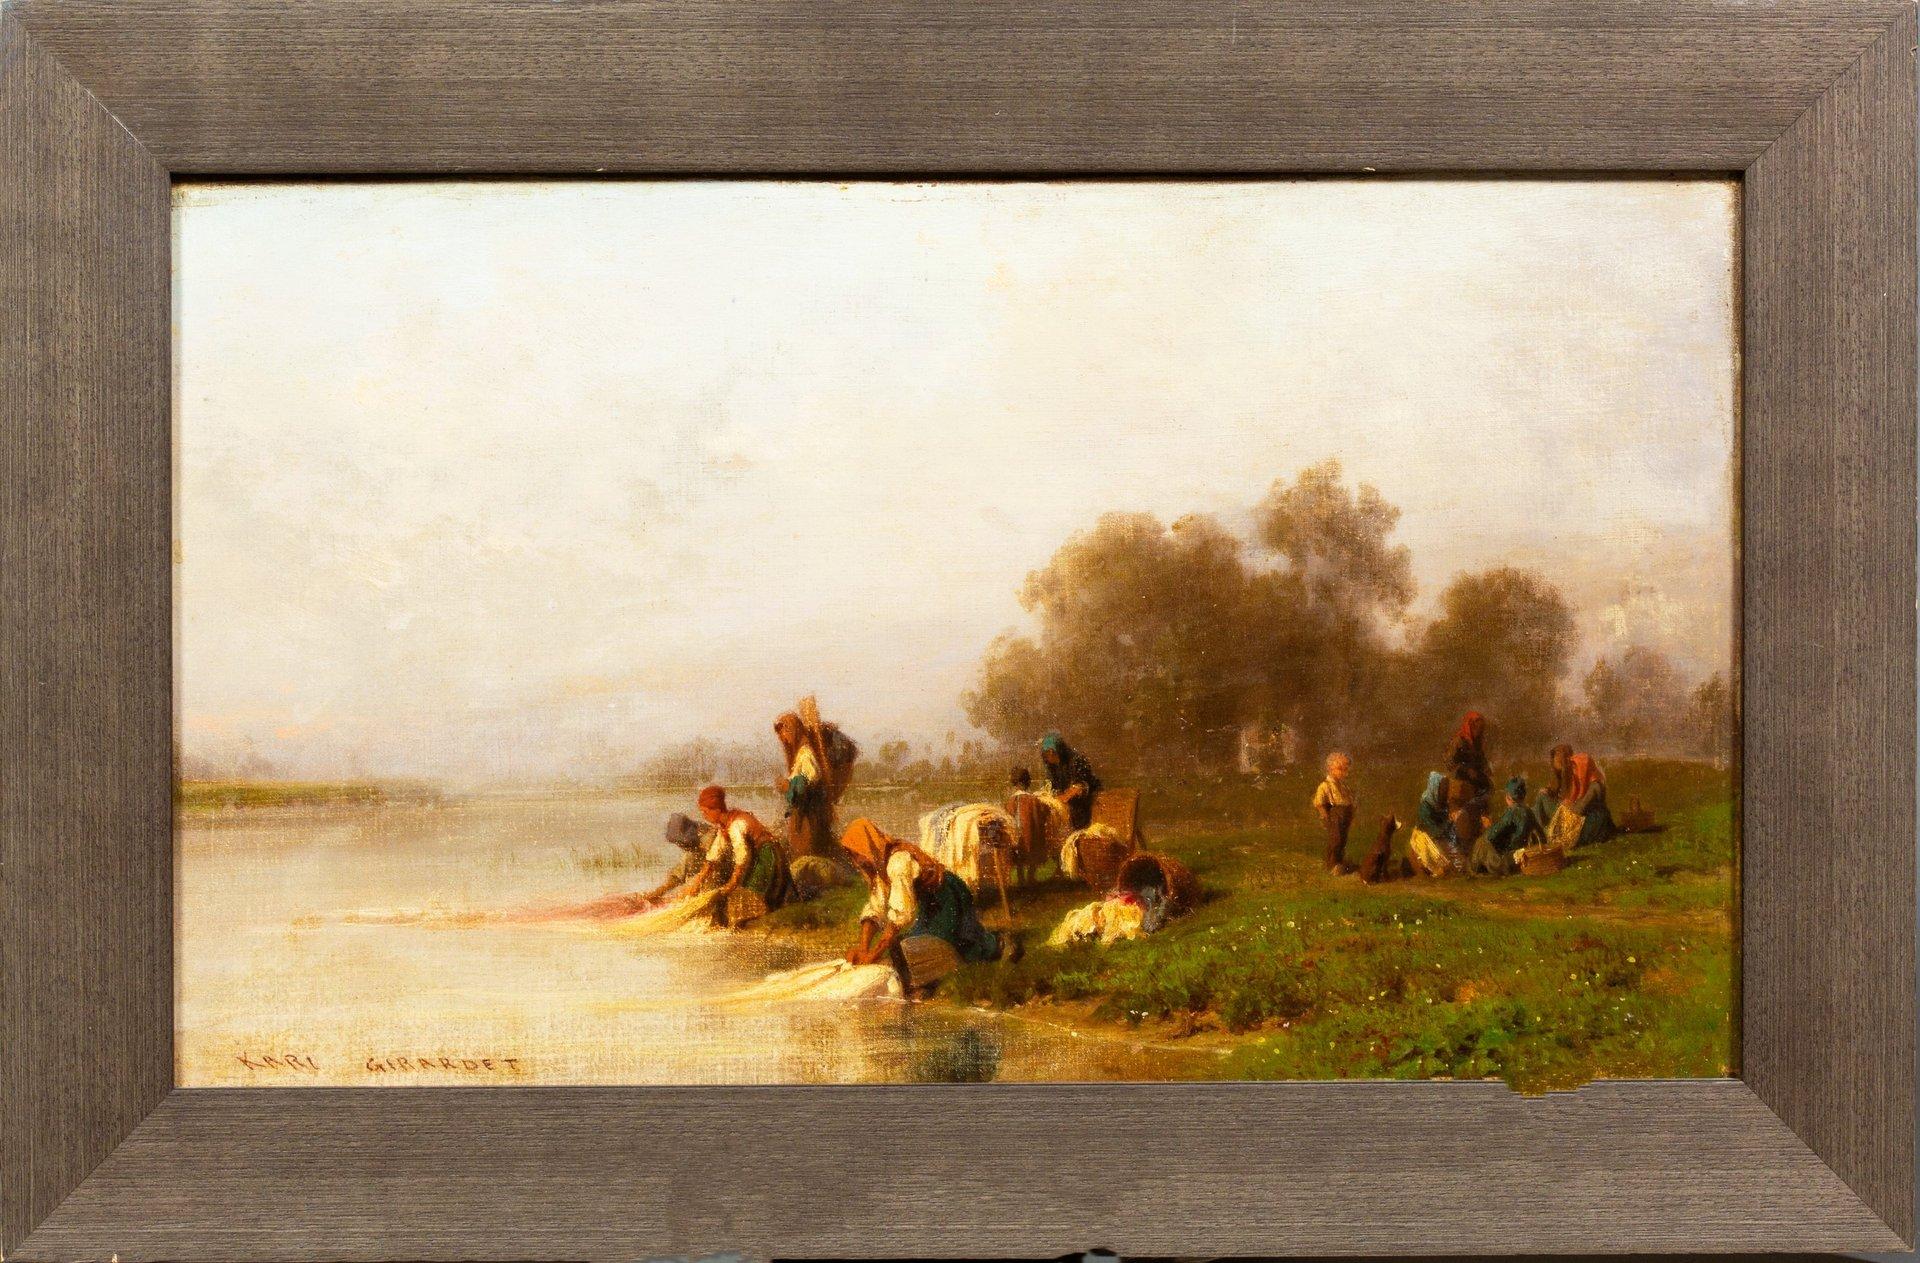 Obersee by François Roffiaen (1820-1898) Oil on canvas For Sale 7